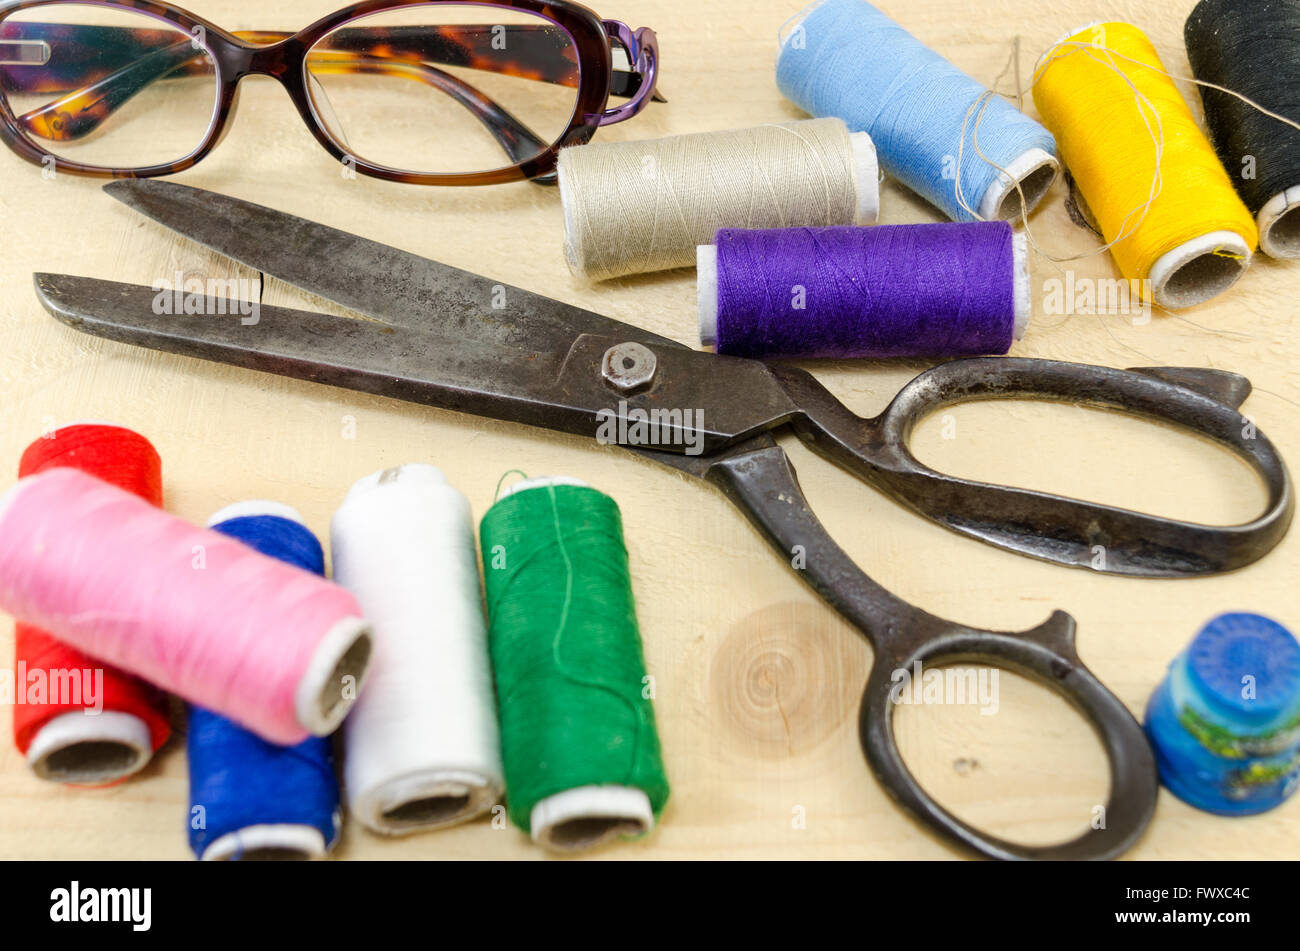 Sewing equipment chaos scattered on the table Stock Photo